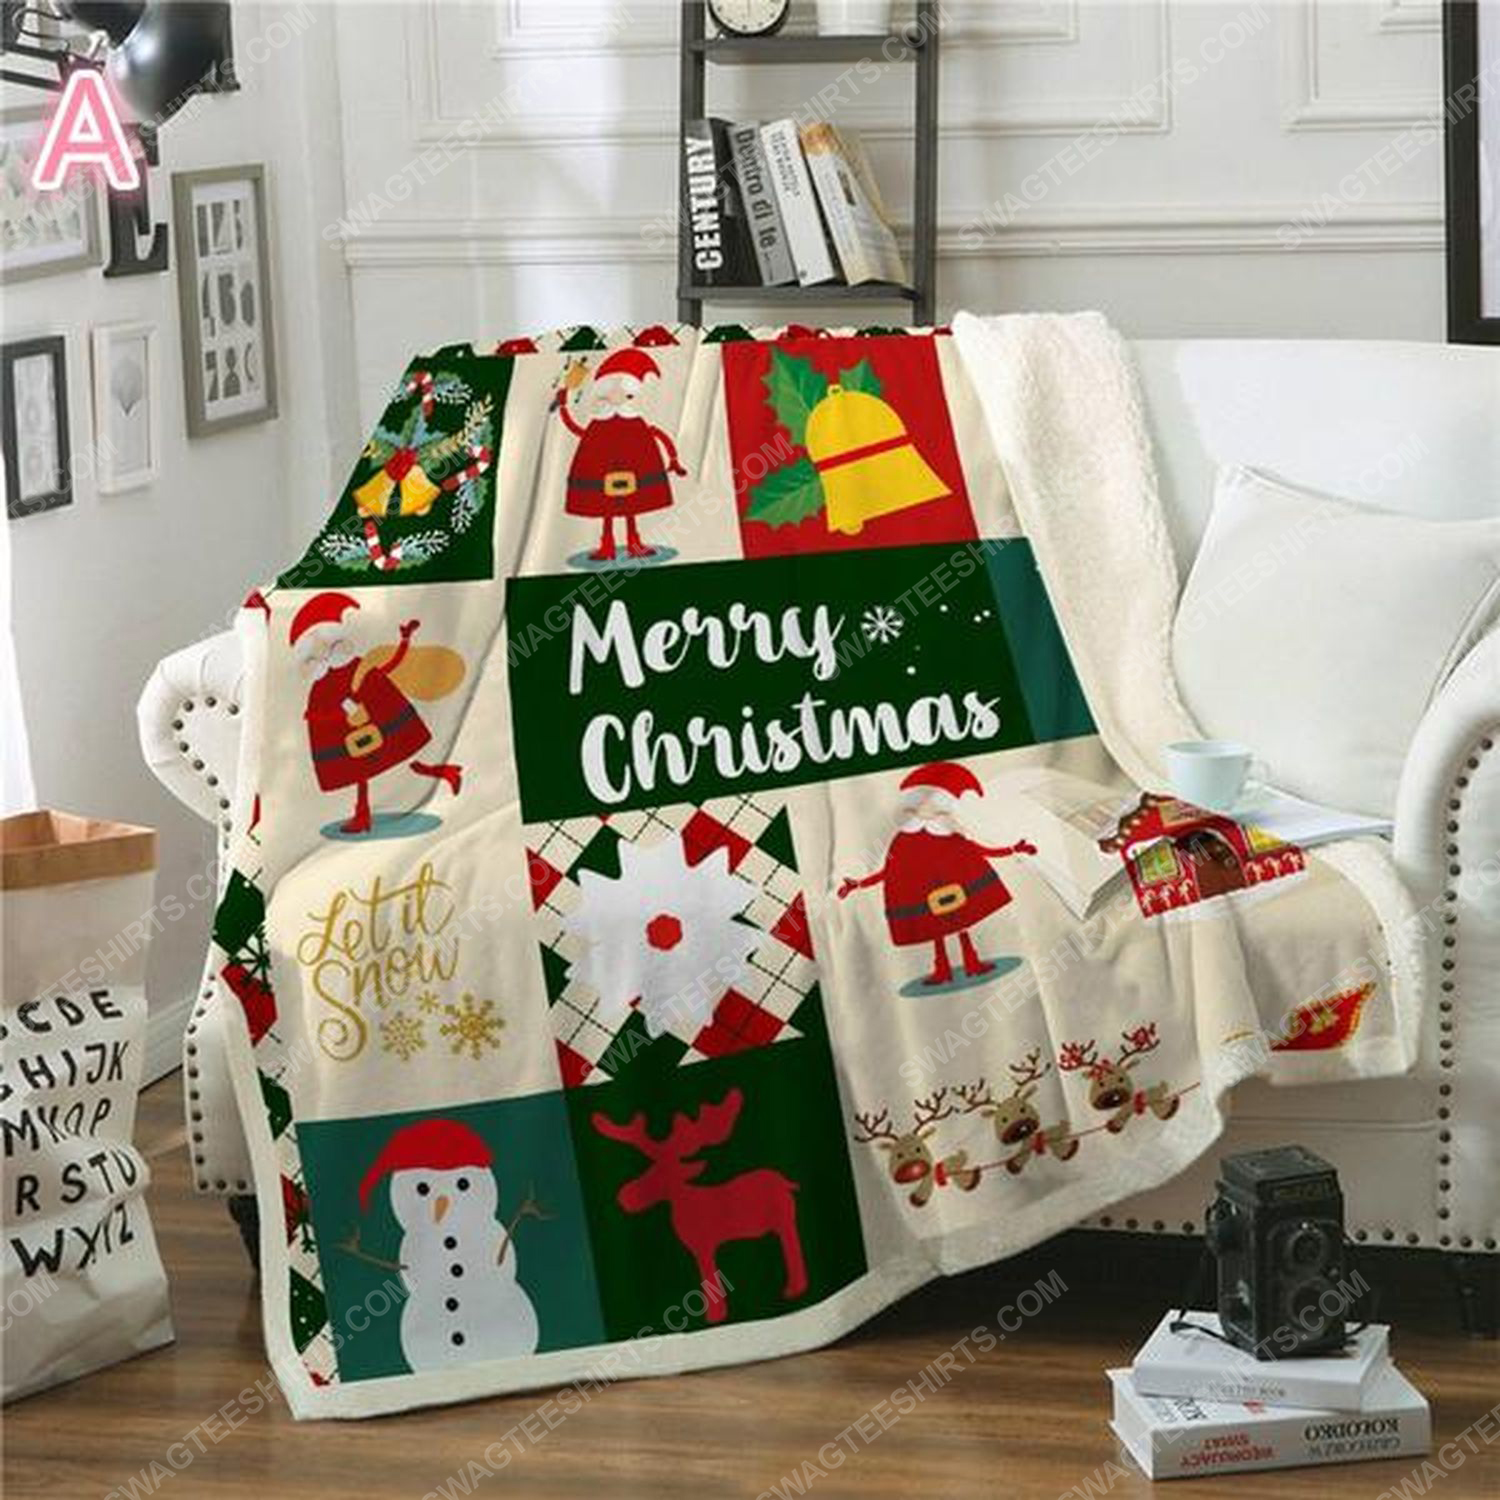 Merry christmas and let it snow blanket 2